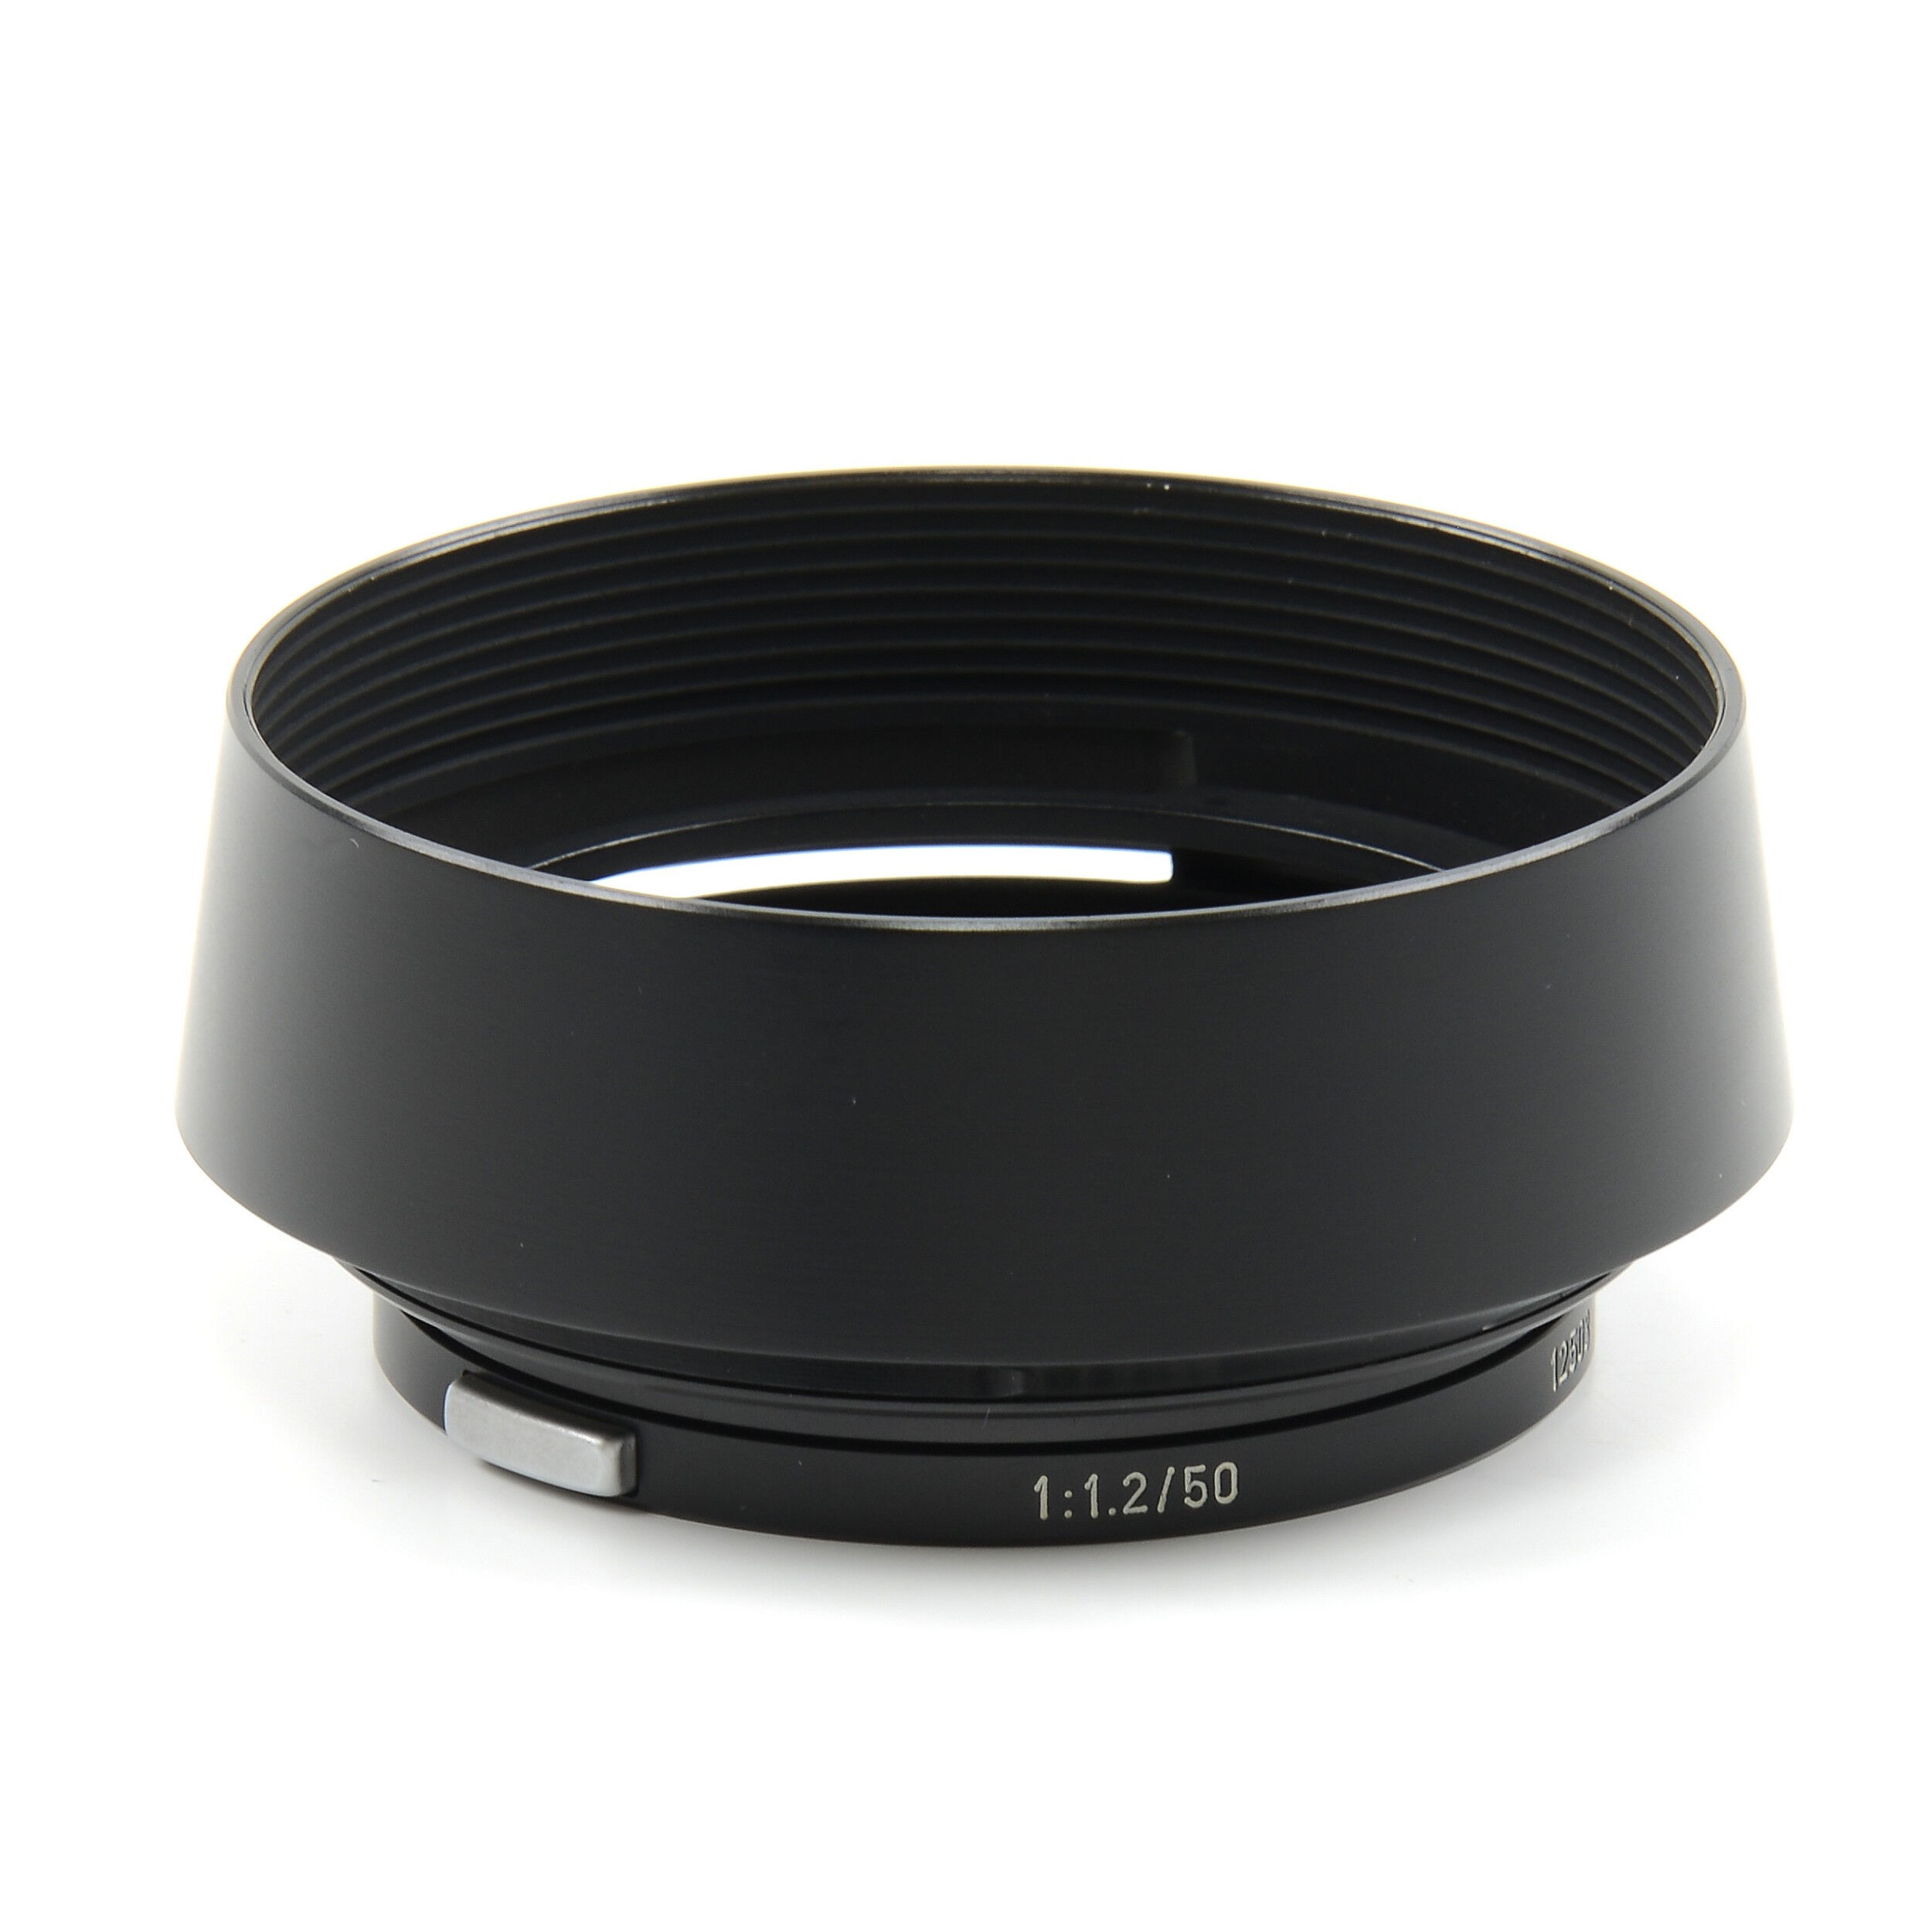 LEITZ 12503 LENS HOOD WITH BOX FOR 50MM F1.2 NOCTILUX EXTREMELY RARE 12503 #4254